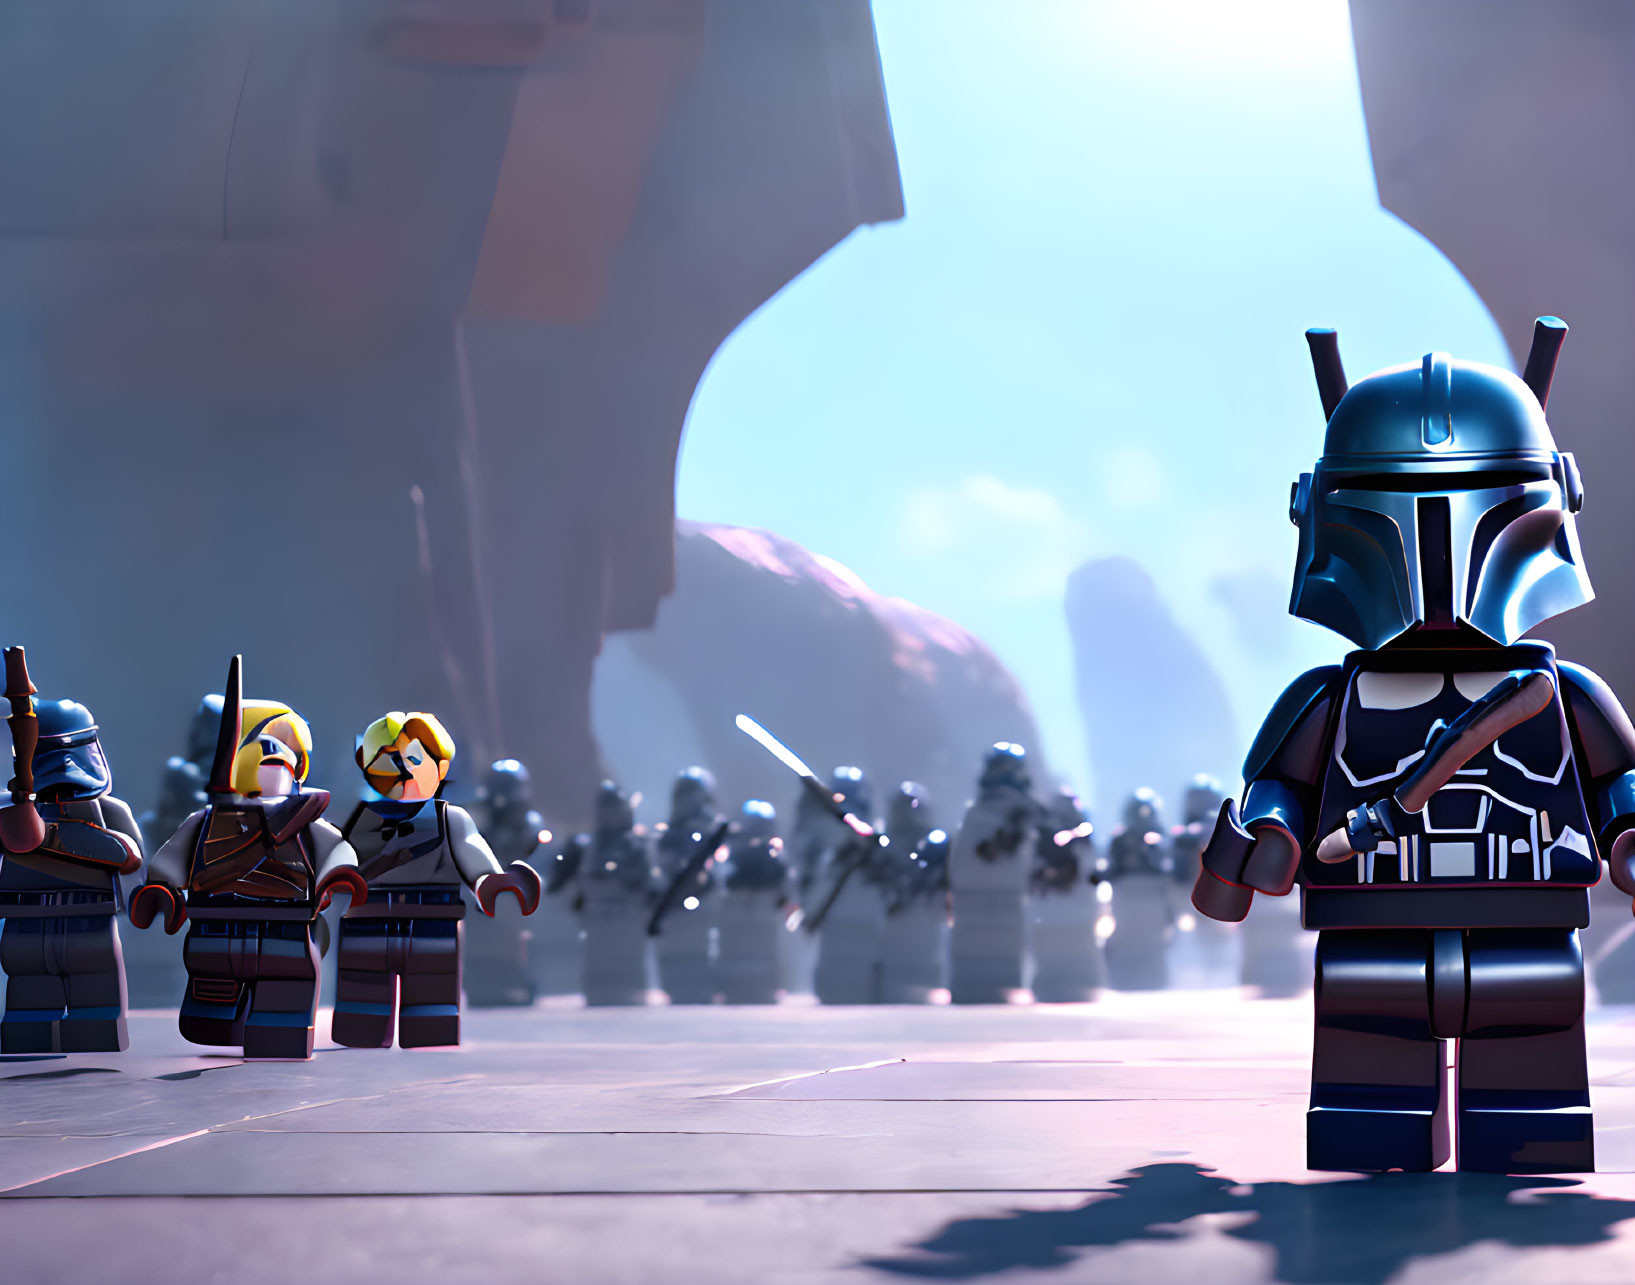 Star Wars-themed LEGO figures against army backdrop.